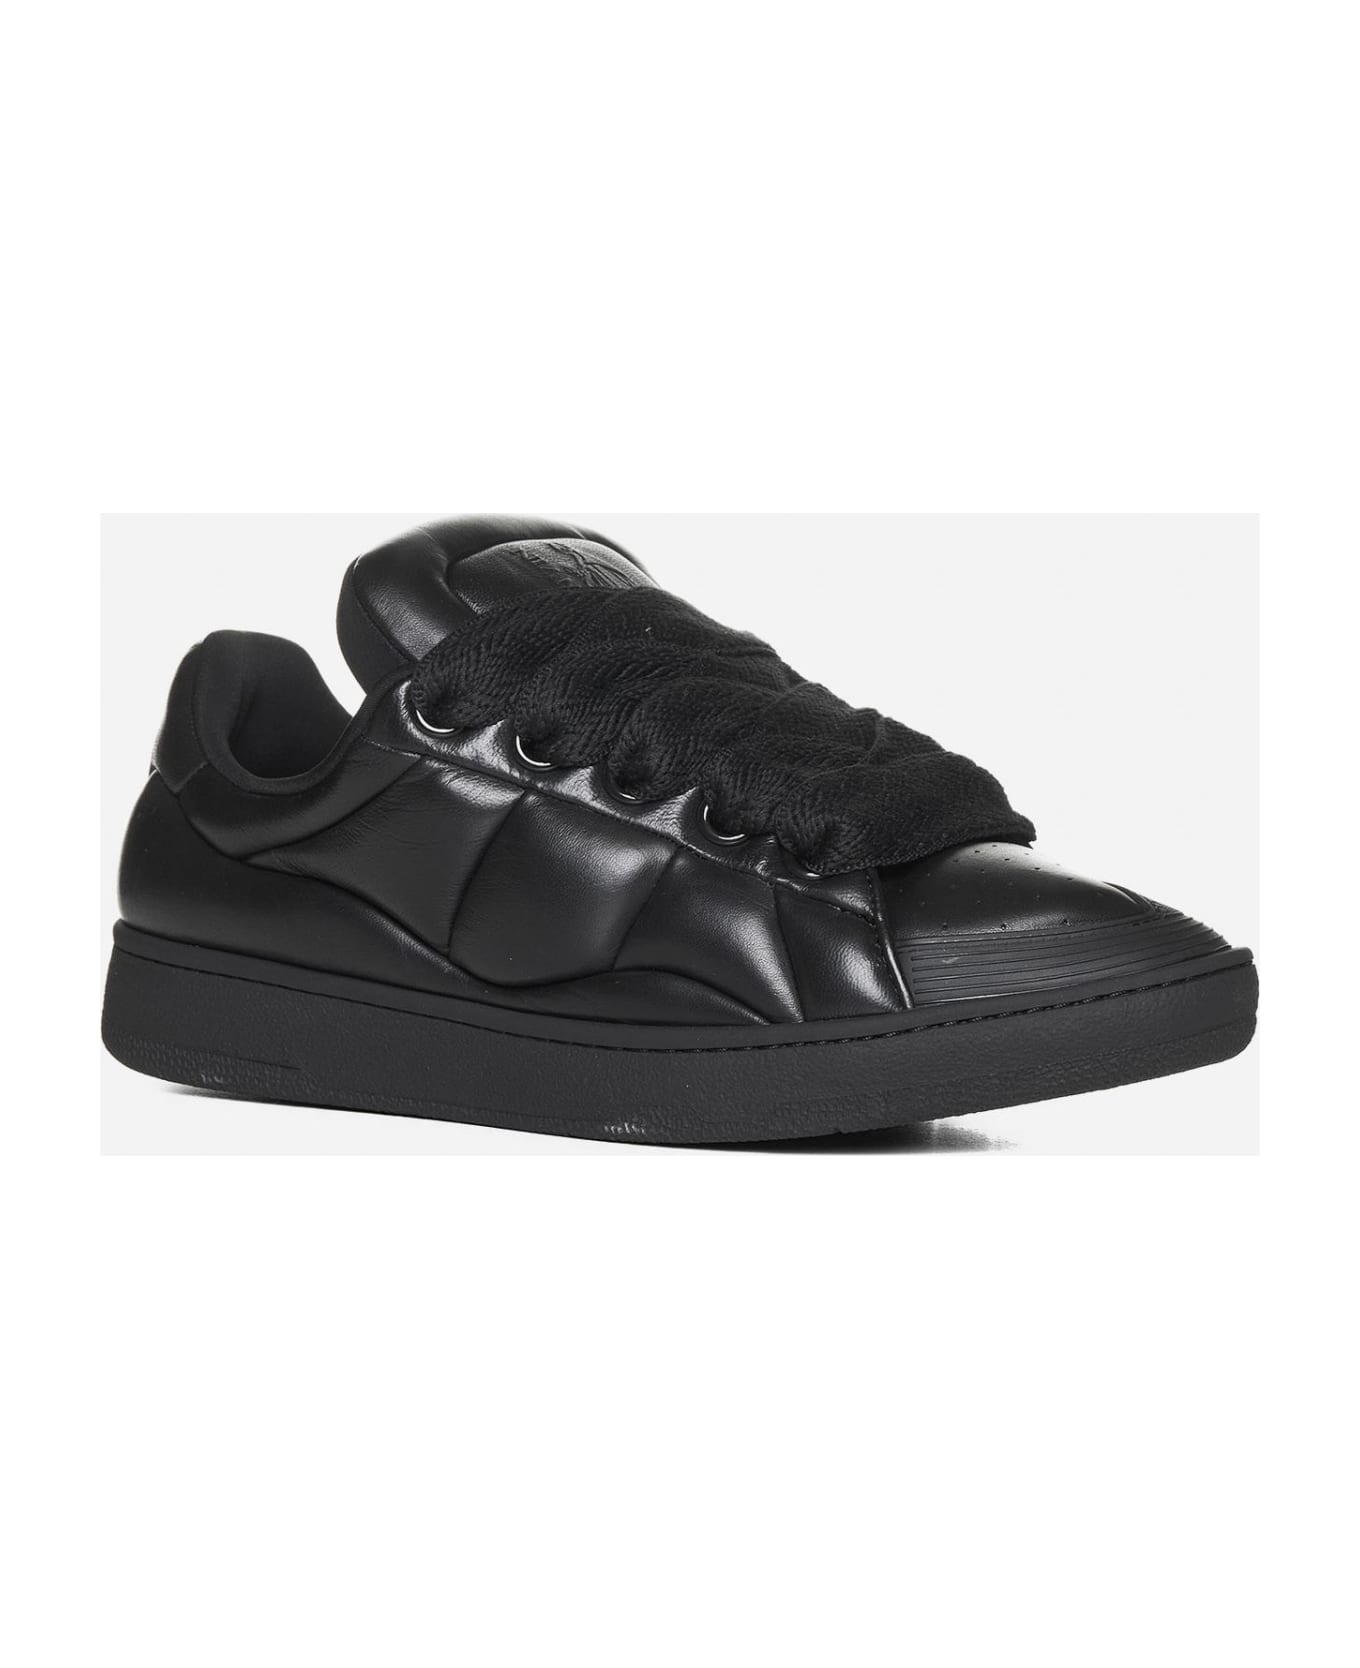 Lanvin Curb Xl Low-top Leather Sneakers - Black スニーカー